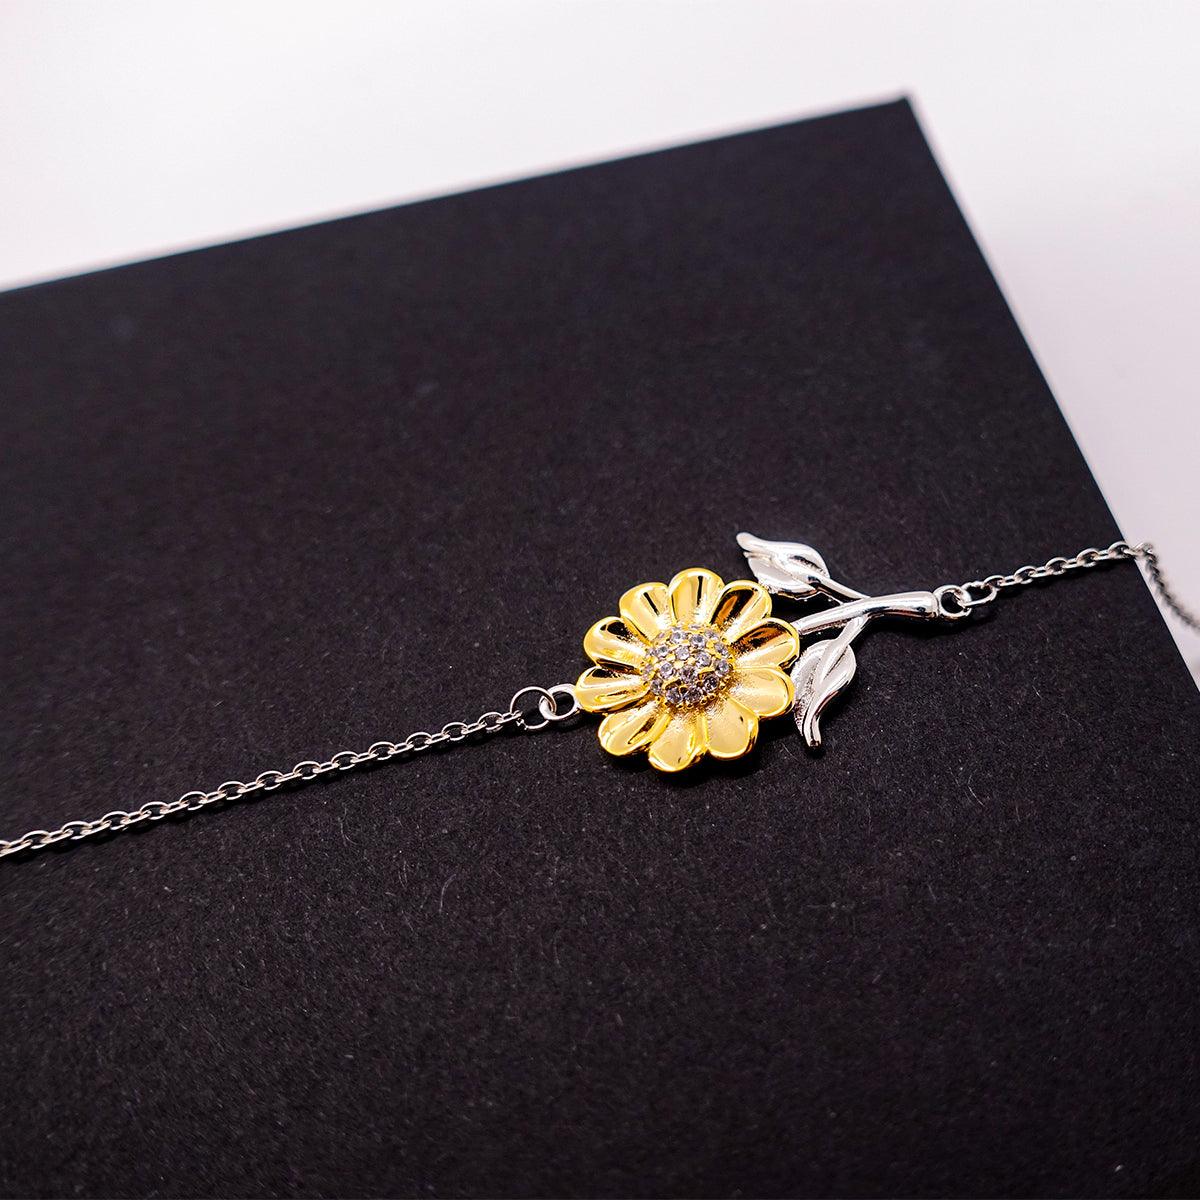 Preacher Sunflower Bracelet - Thanks for being who you are - Birthday Christmas Jewelry Gifts Coworkers Colleague Boss - Mallard Moon Gift Shop